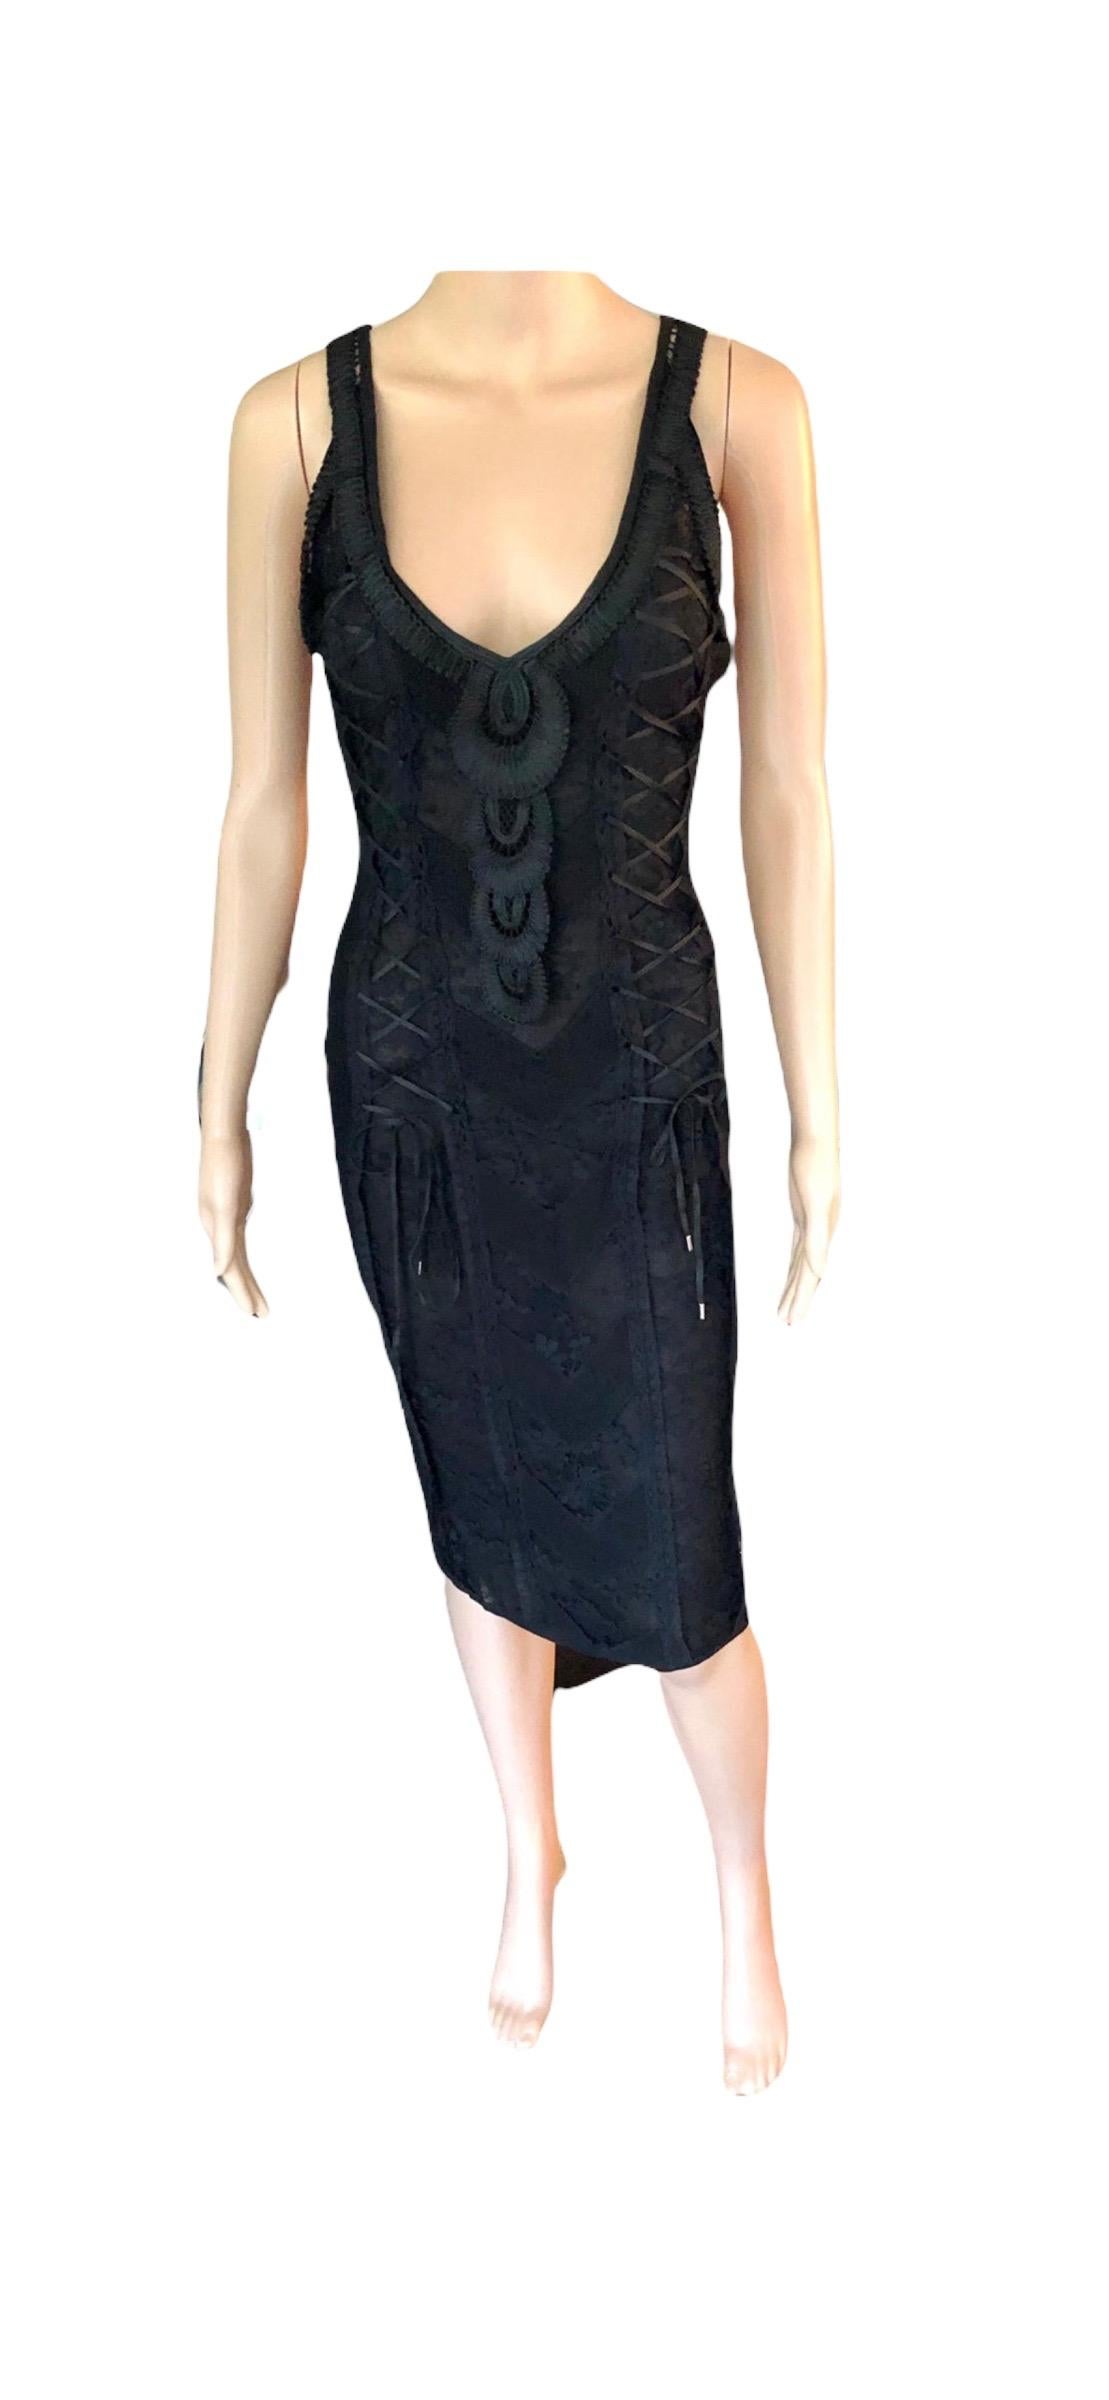 Christian Dior by John Galliano S/S 2006 Sheer Lace Trimmed Corset Knit Dress For Sale 5